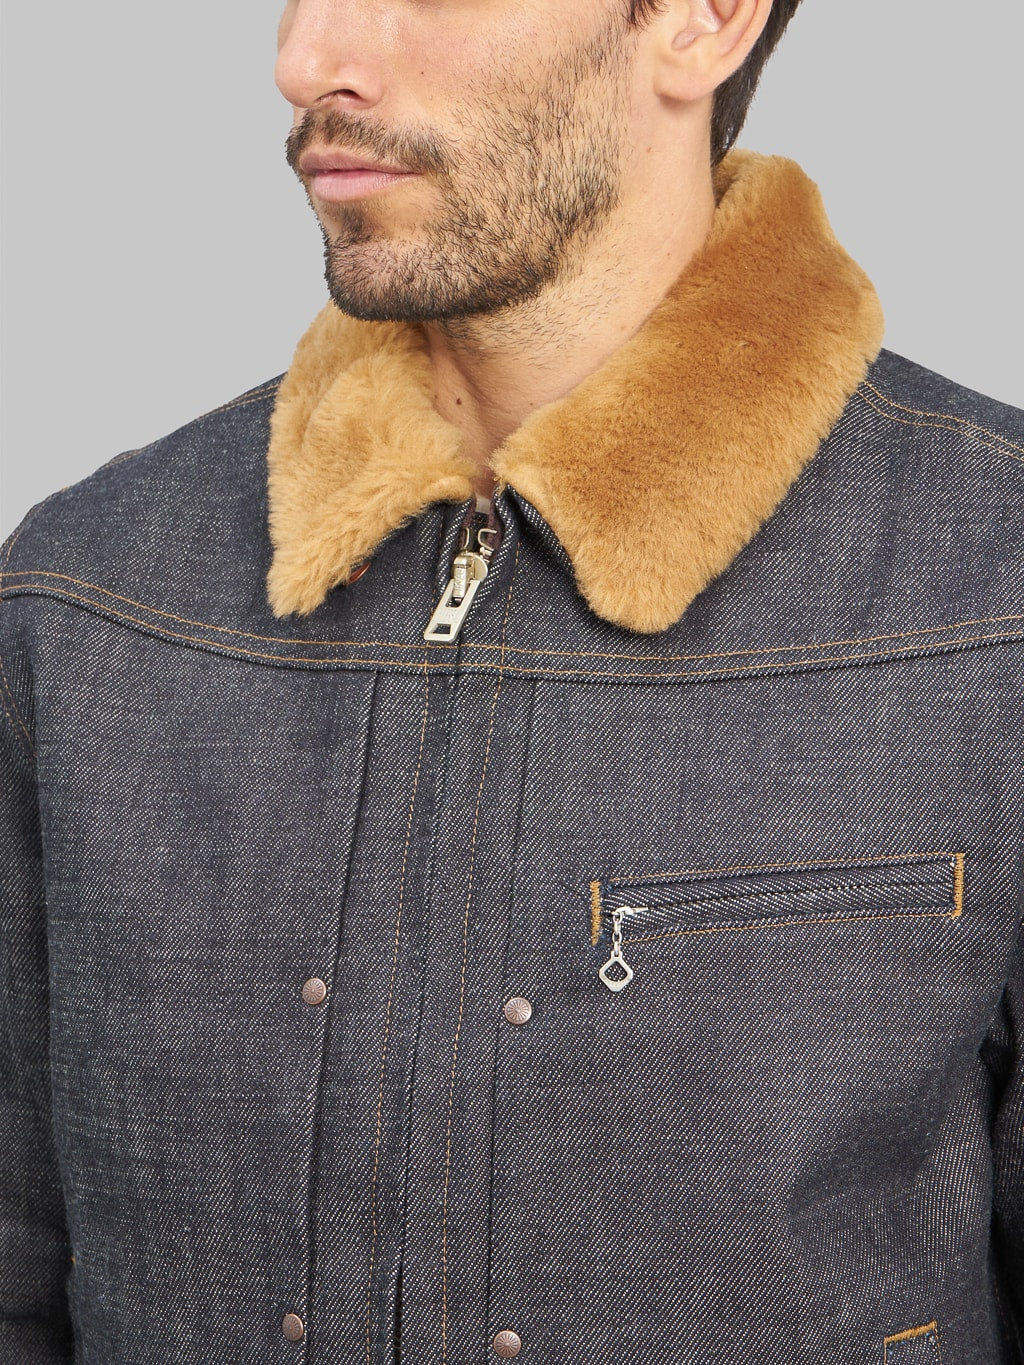 Freenote Cloth Denim Shearling Jacket front chest details